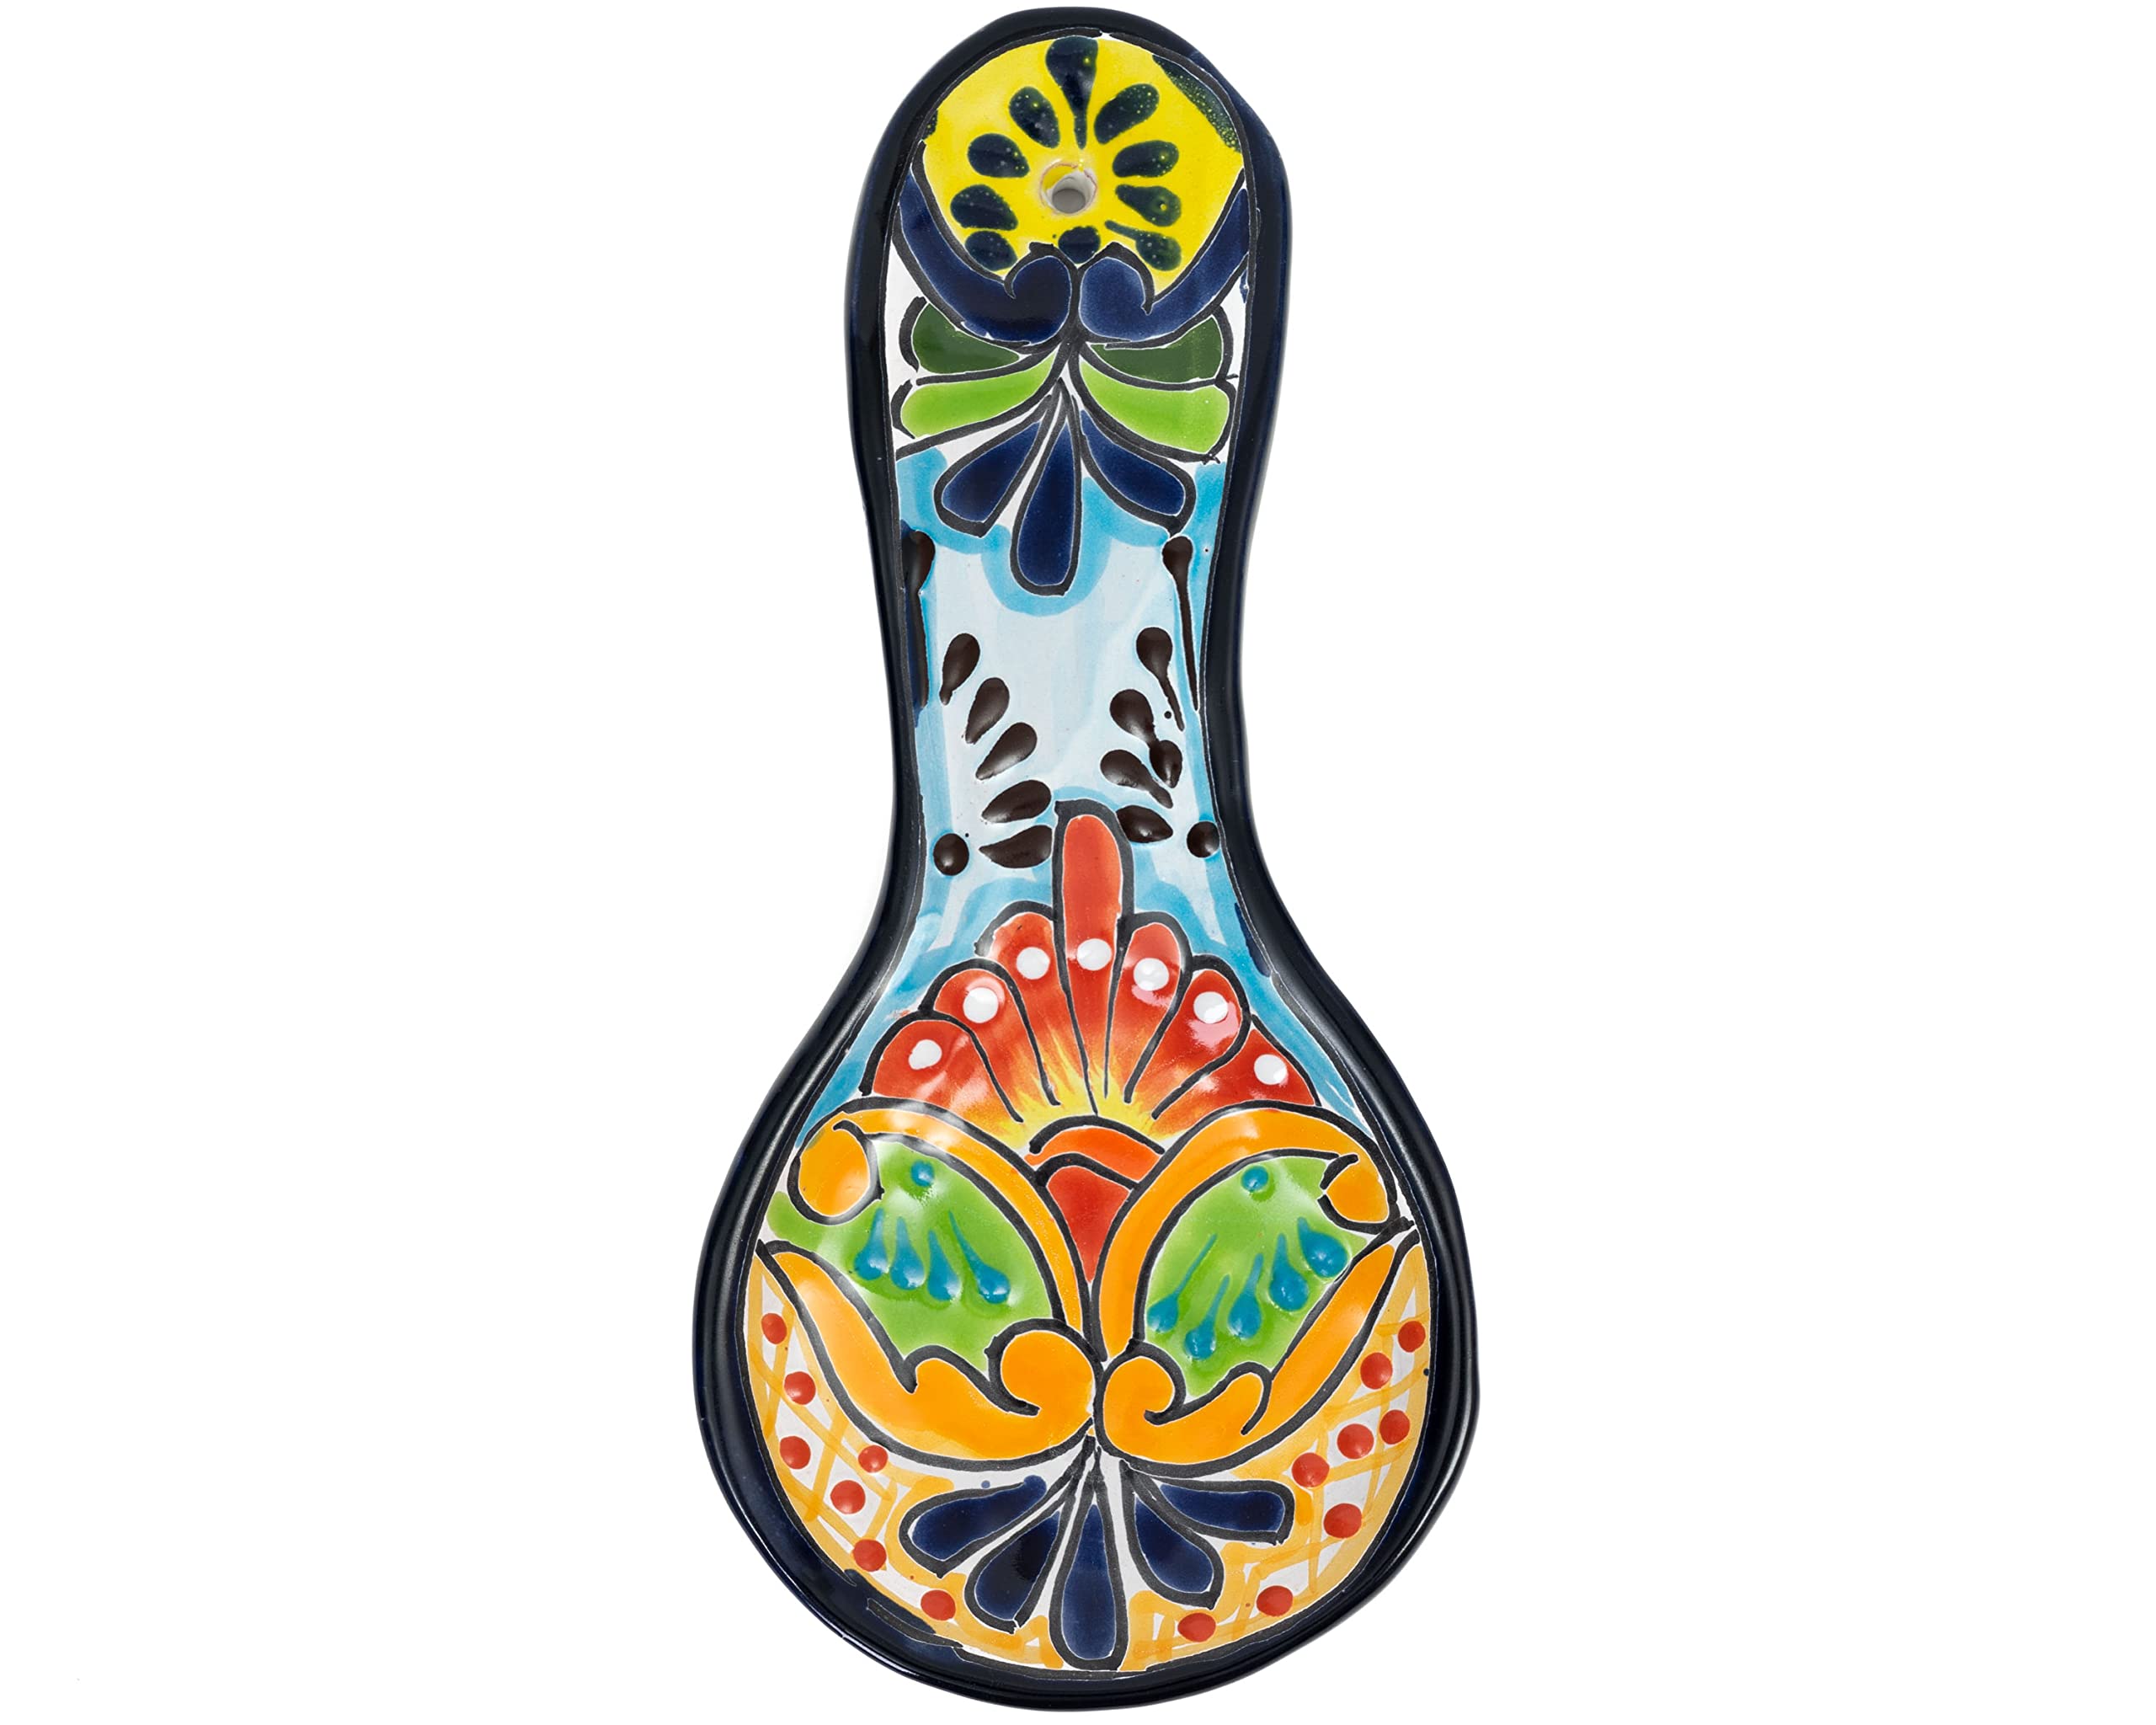 Enchanted Talavera Hand Painted Ceramic Spoon Rest Kitchen Counter top Utensil Holder For Spoons Spanish Mexican Decorations (Multi)